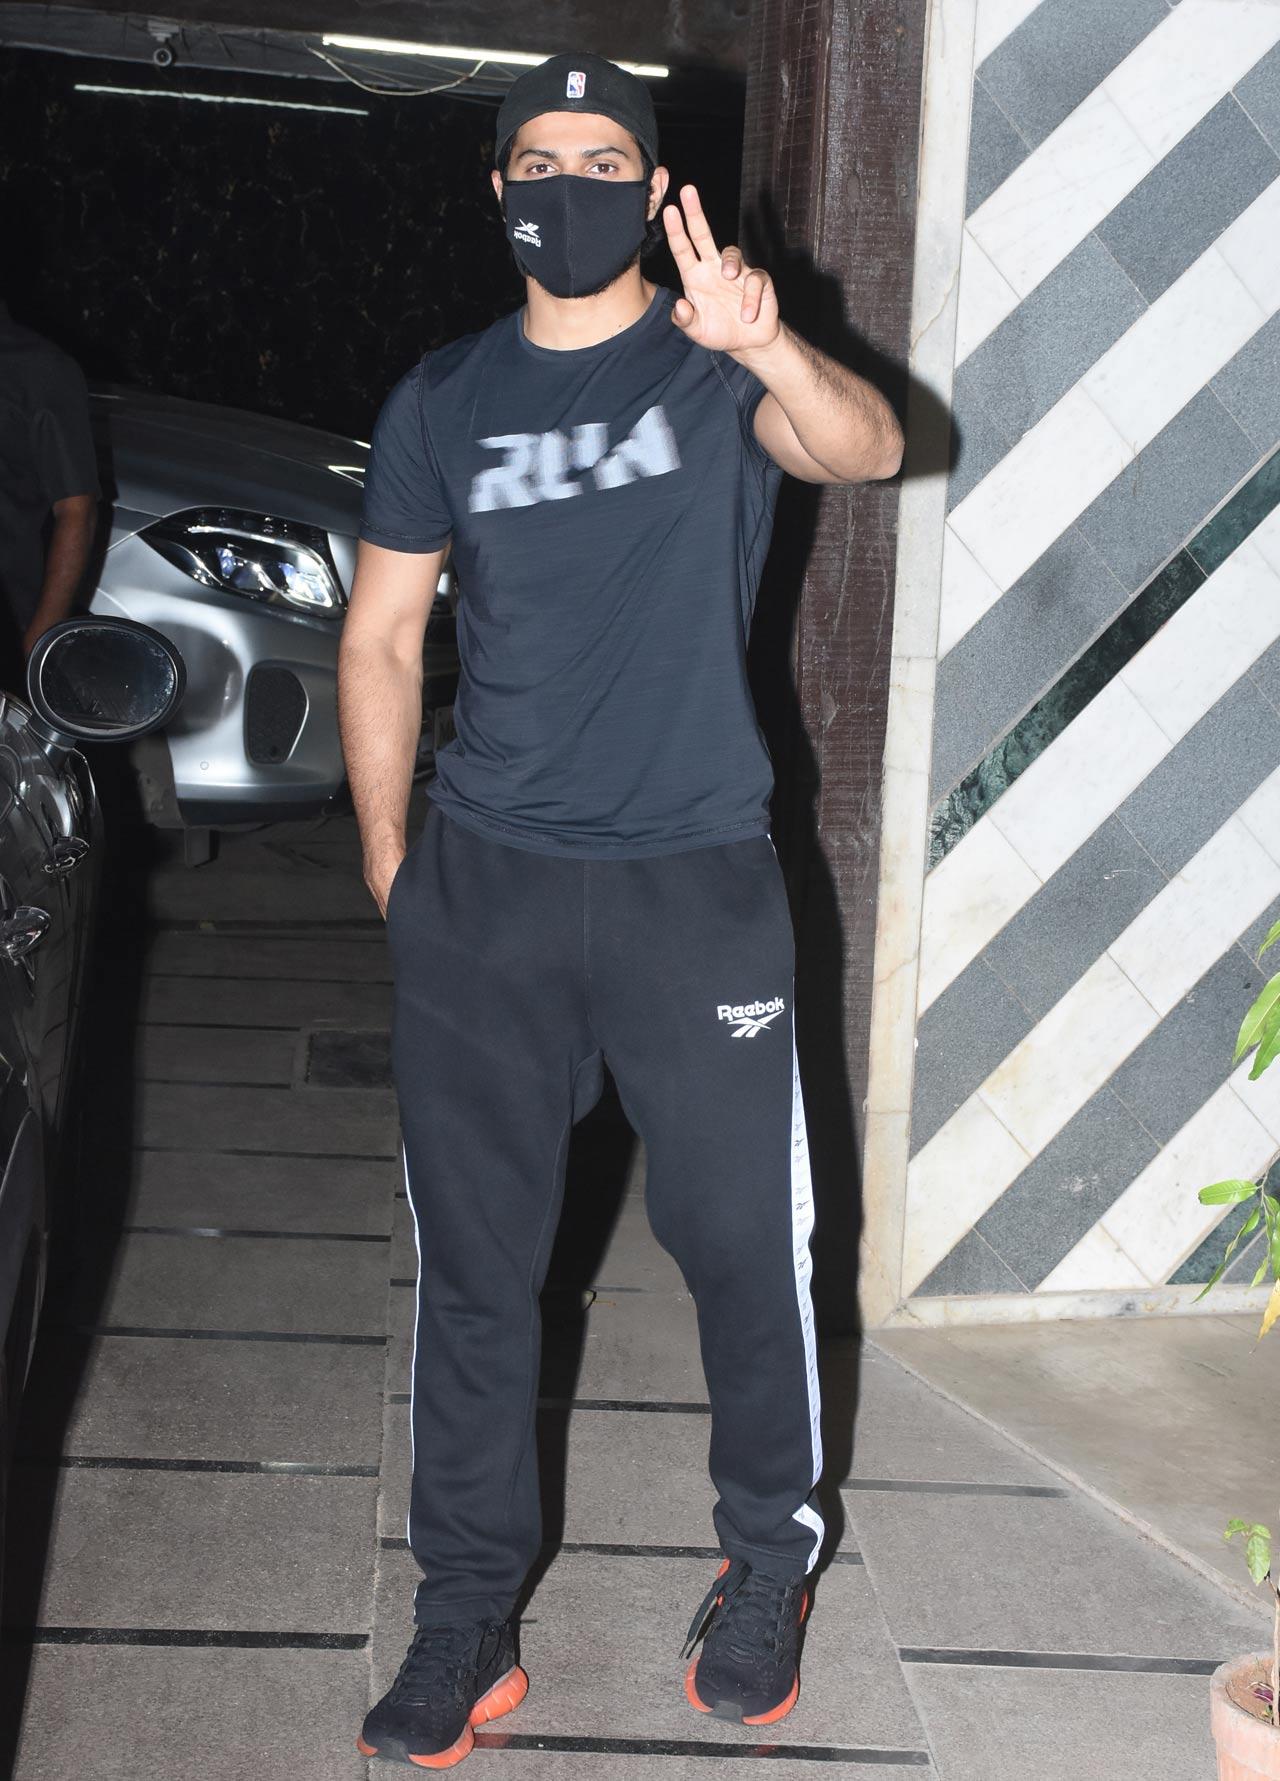 Varun Dhawan, who tied the knot with his long-time girlfriend Natasha Dalal on January 24, 2021, was snapped at the gym in Juhu, Mumbai. On the work front, Varun will be next seen opposite Kiara Advani in Jugg Jug Jeeyo.